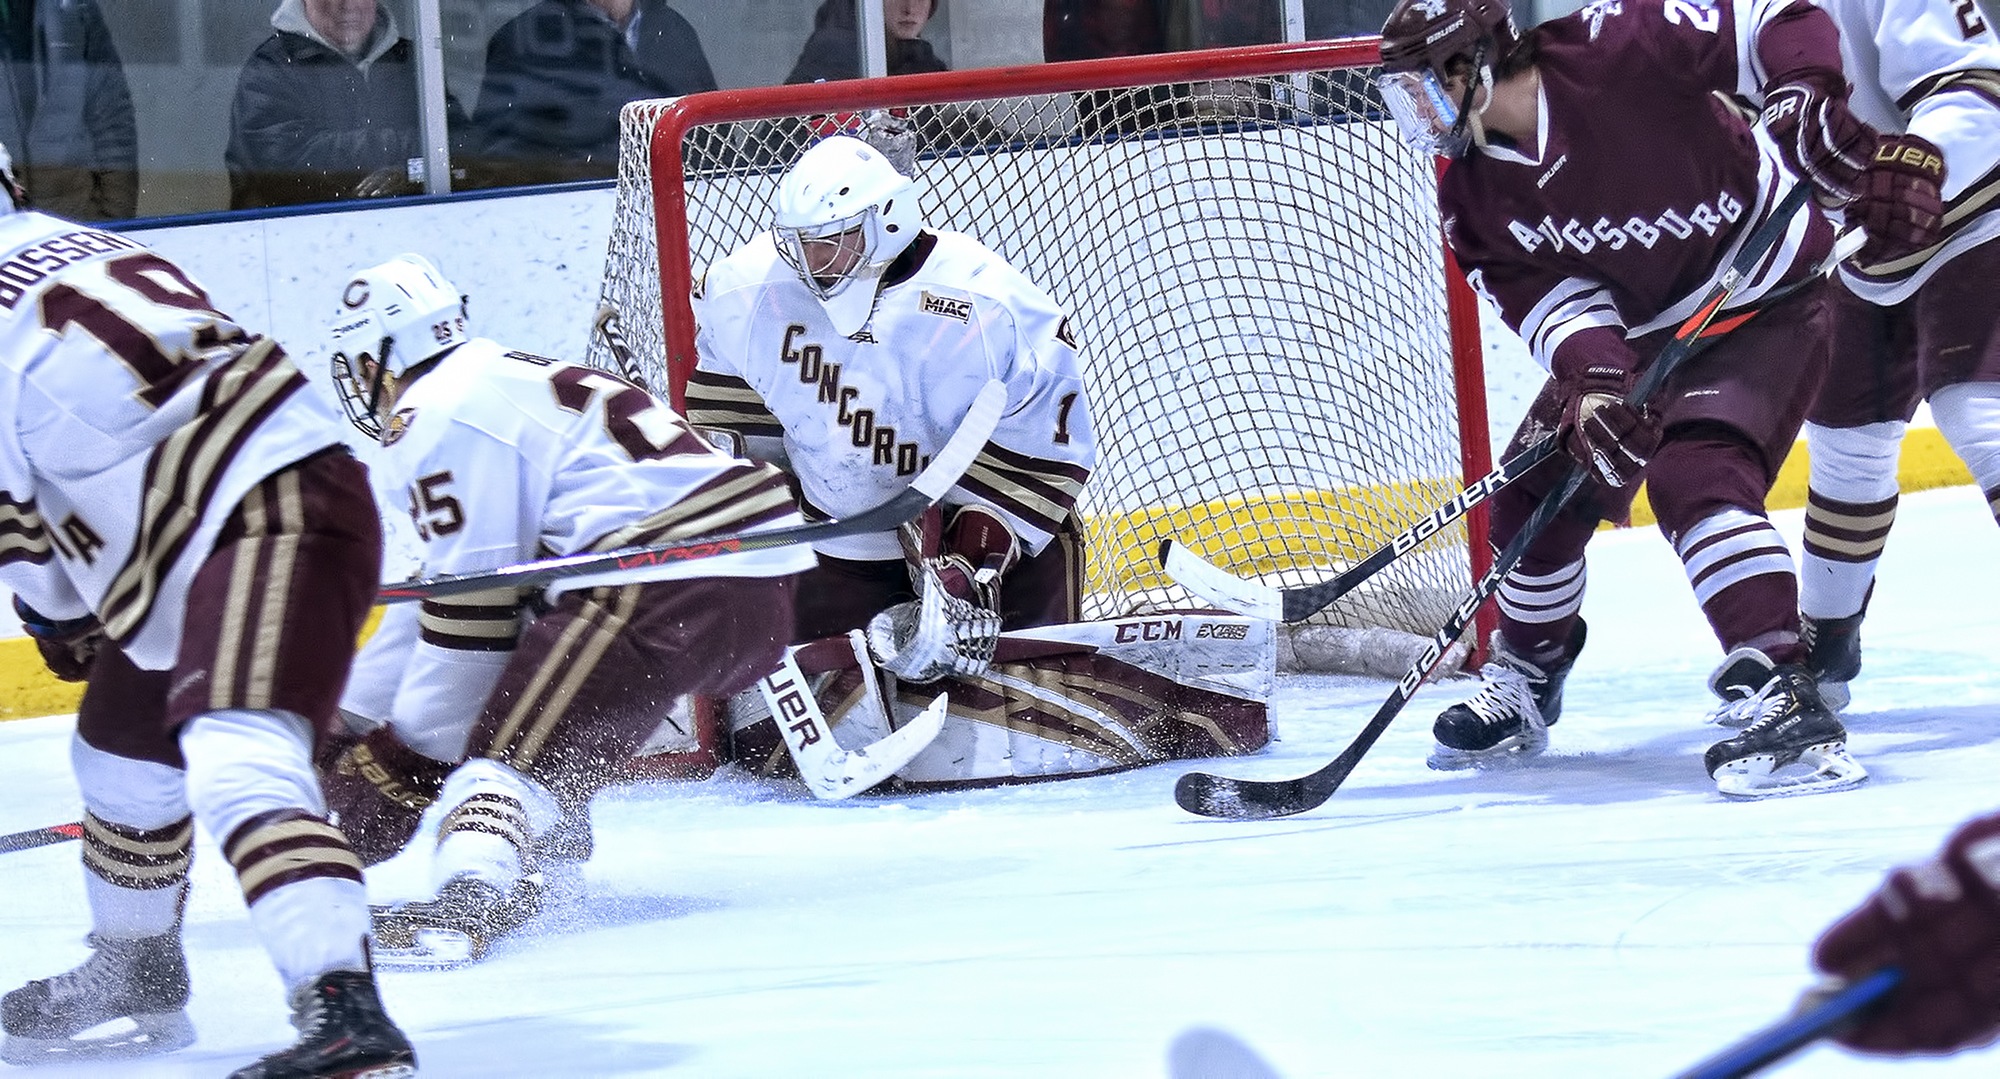 Senior Jacob Stephan goes to the ice to make the save in the first period of the Cobbers' 2-1 win against #15 Augsburg in the series finale. Stephan finished with 35 saves.